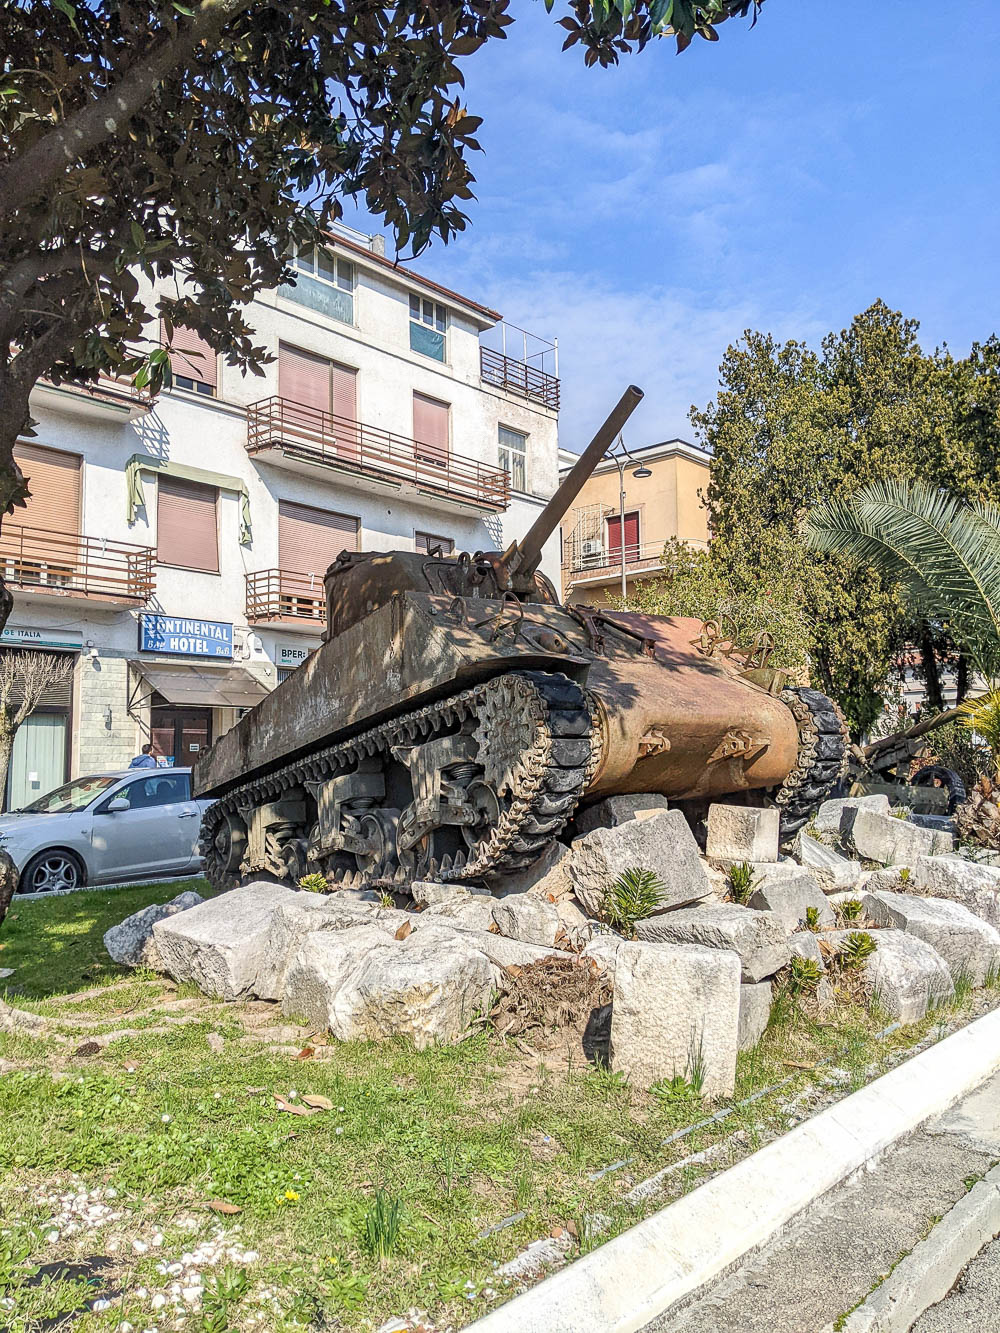 ww2 sites to visit in italy